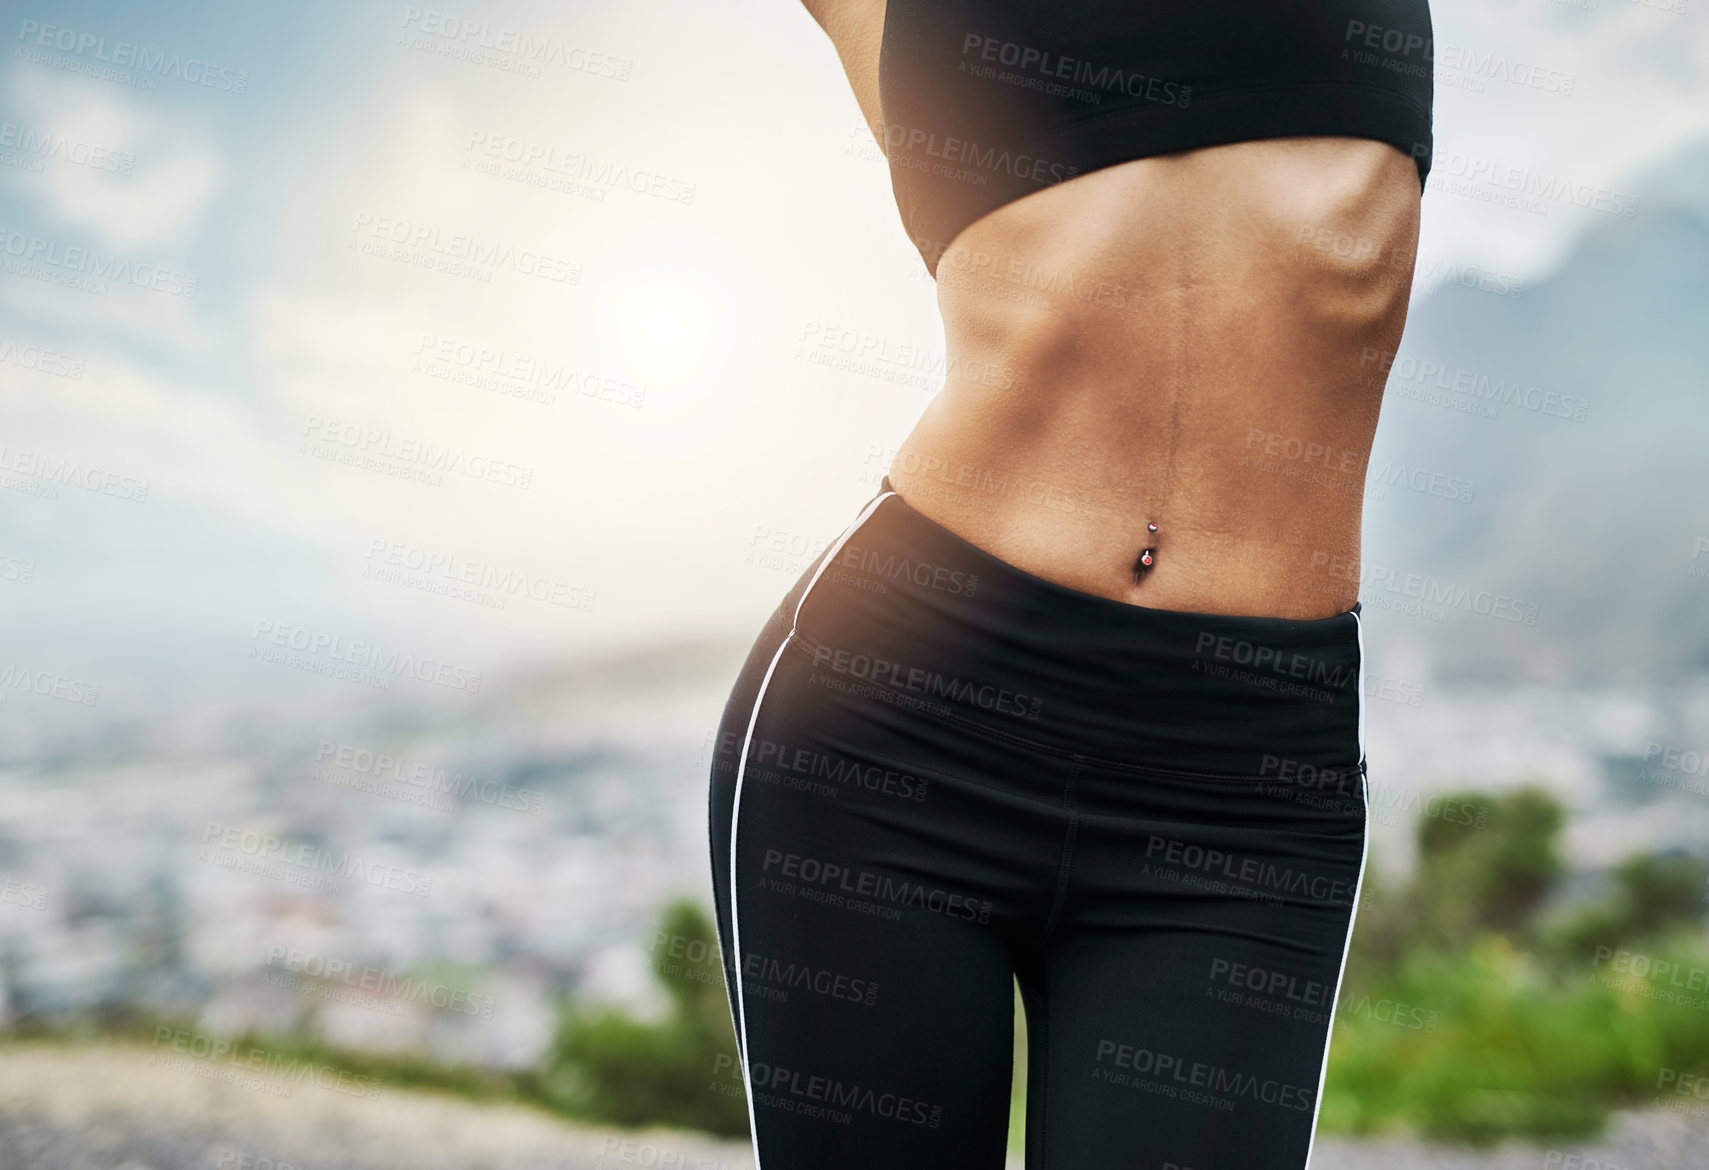 Buy stock photo Closeup shot of a sporty young woman's toned body